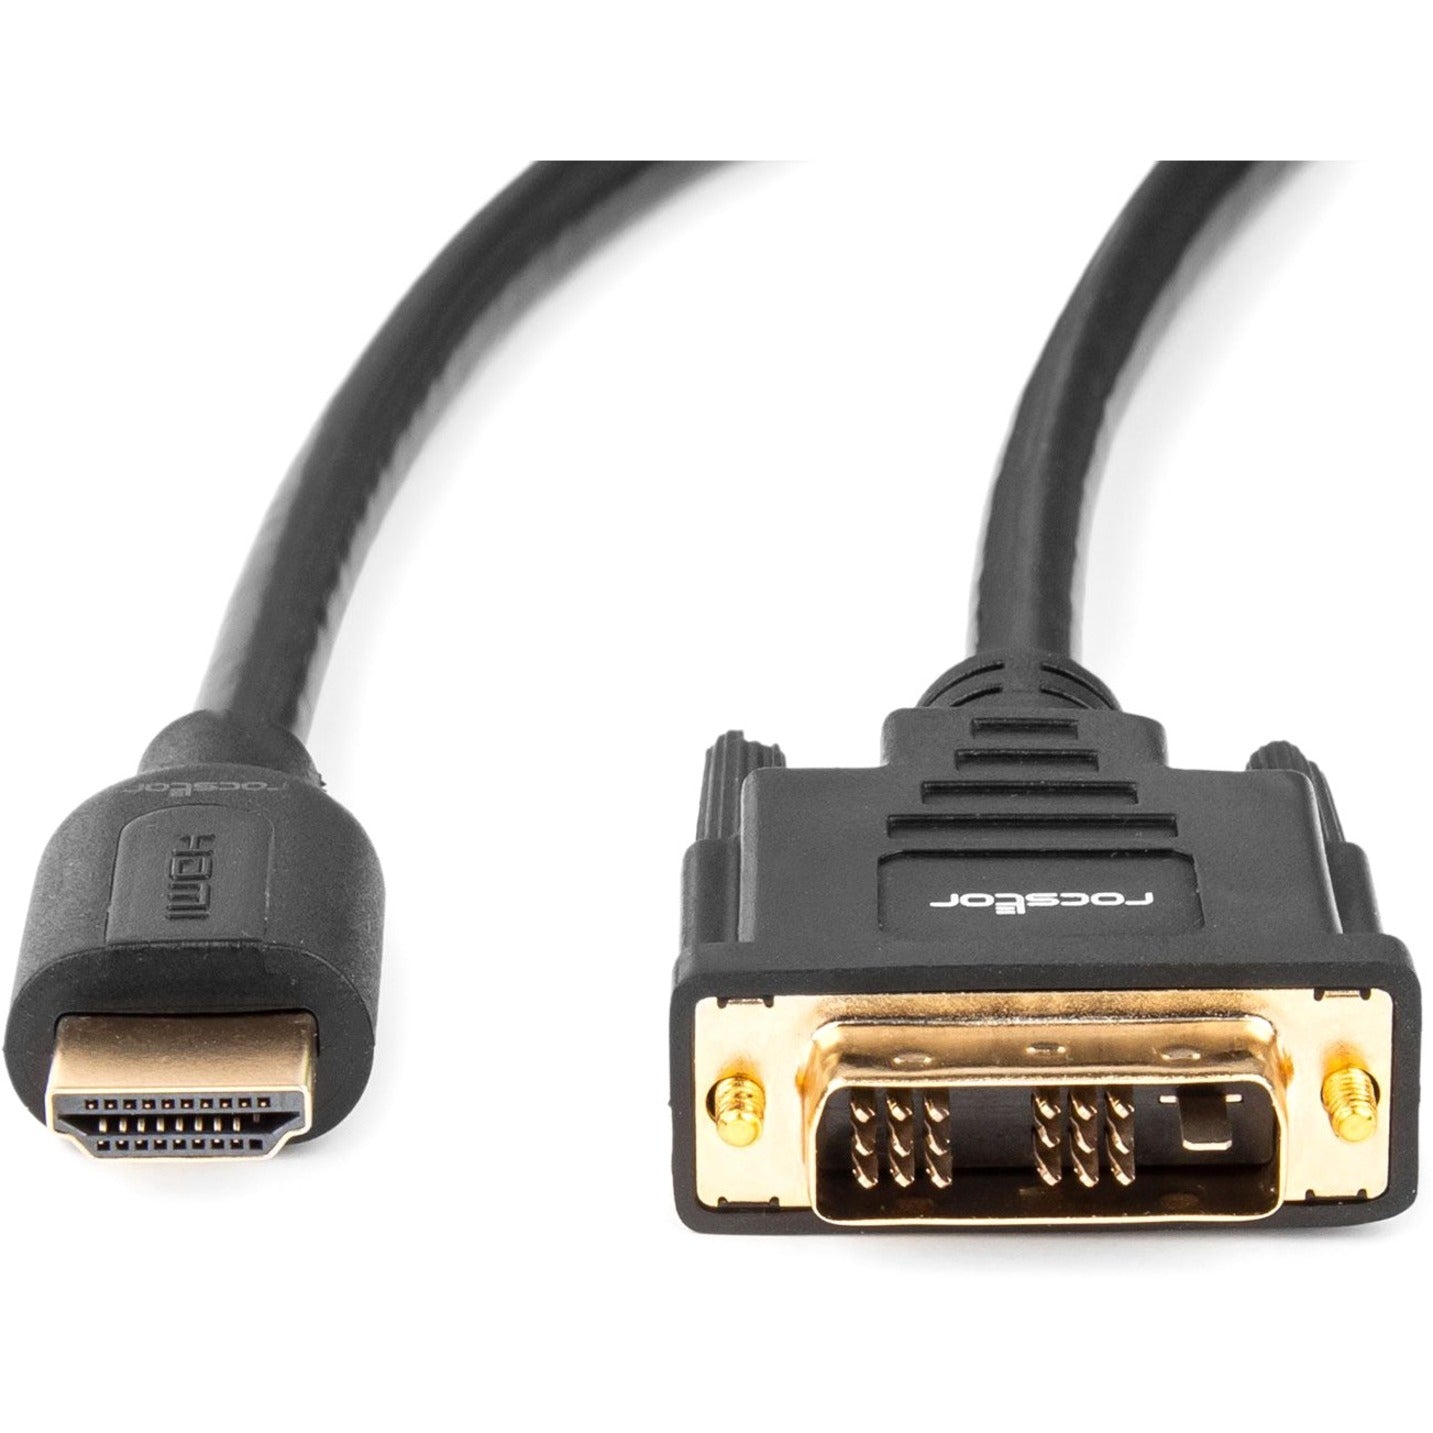 Rocstor Y10C266-B1 Premium HDMI to DVI-D Cable Male to Male, 3 ft, Gold-Plated, 1920 x 1200 Supported Resolution